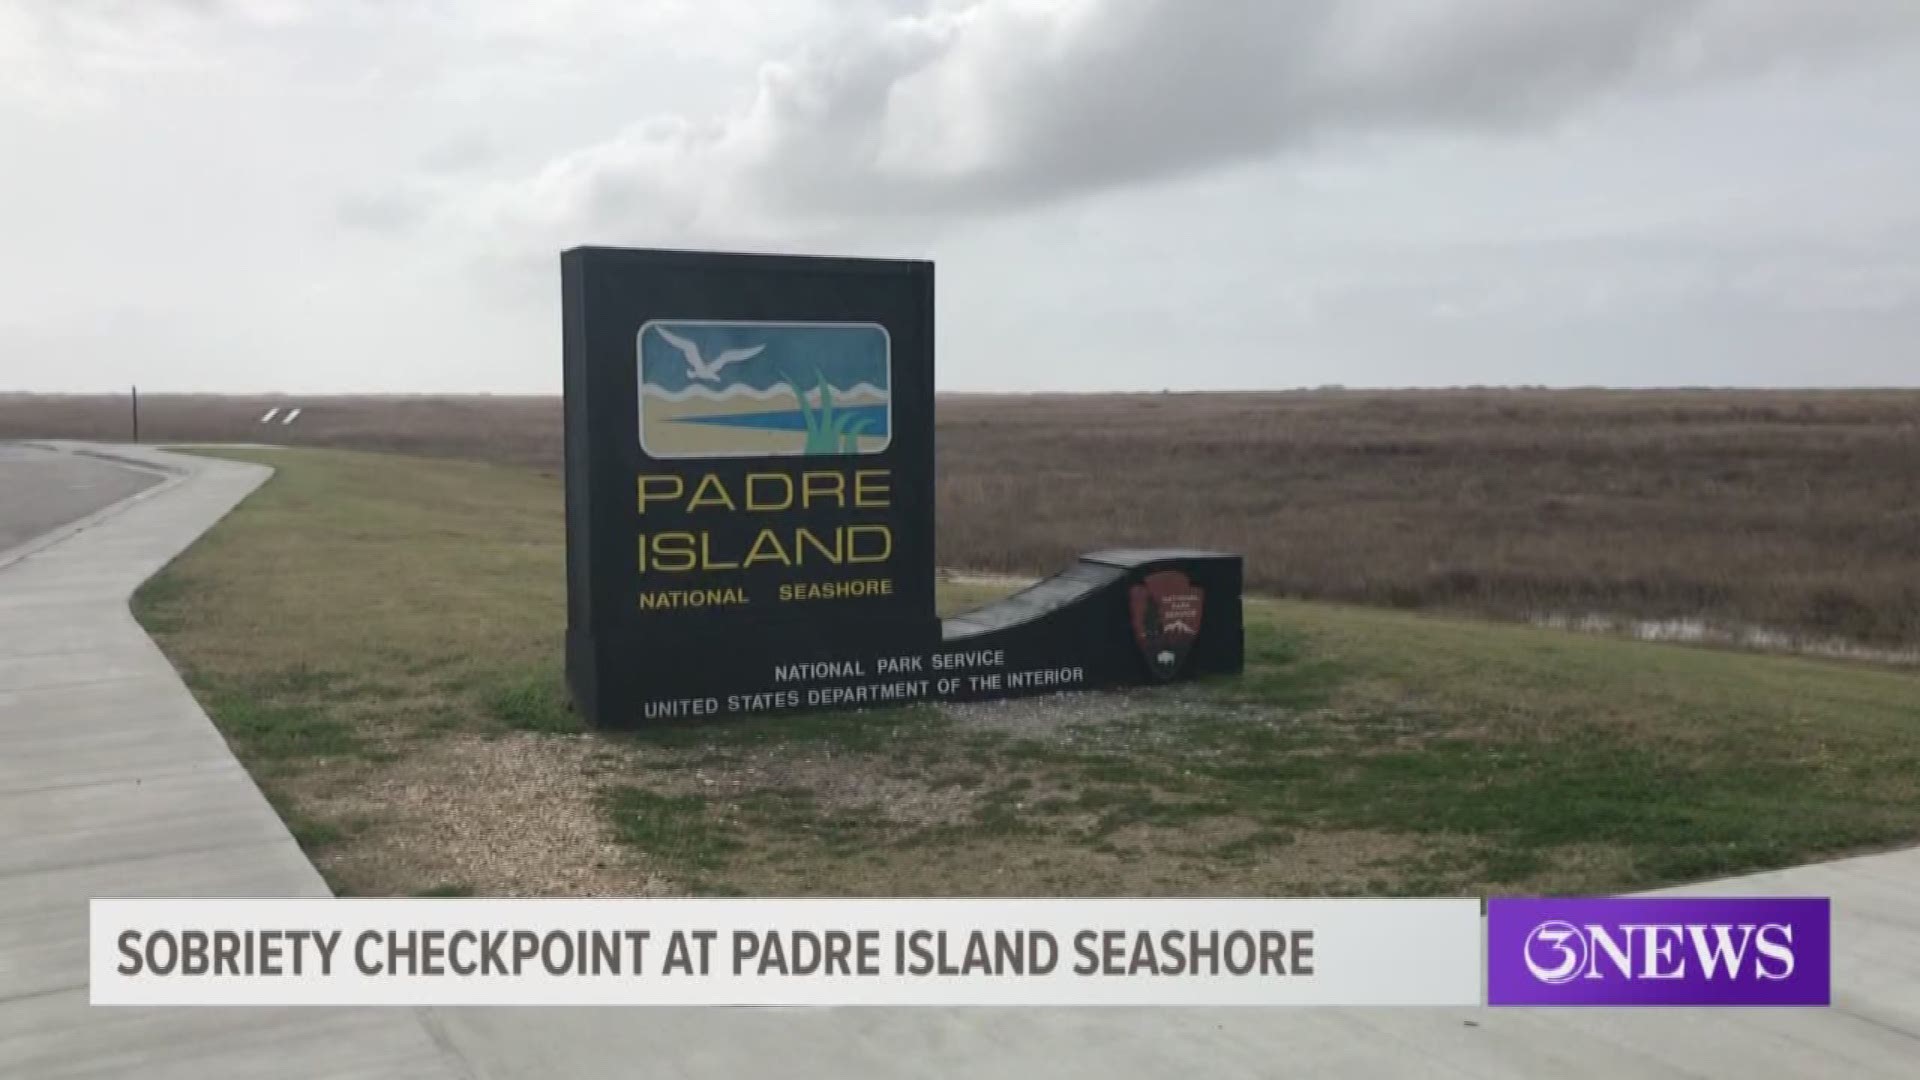 Law enforcement officials are working to keep visitors at the Padre Island National Seashore safe this weekend by conducting a sobriety checkpoint as part of their high visibility enforcement campaign.